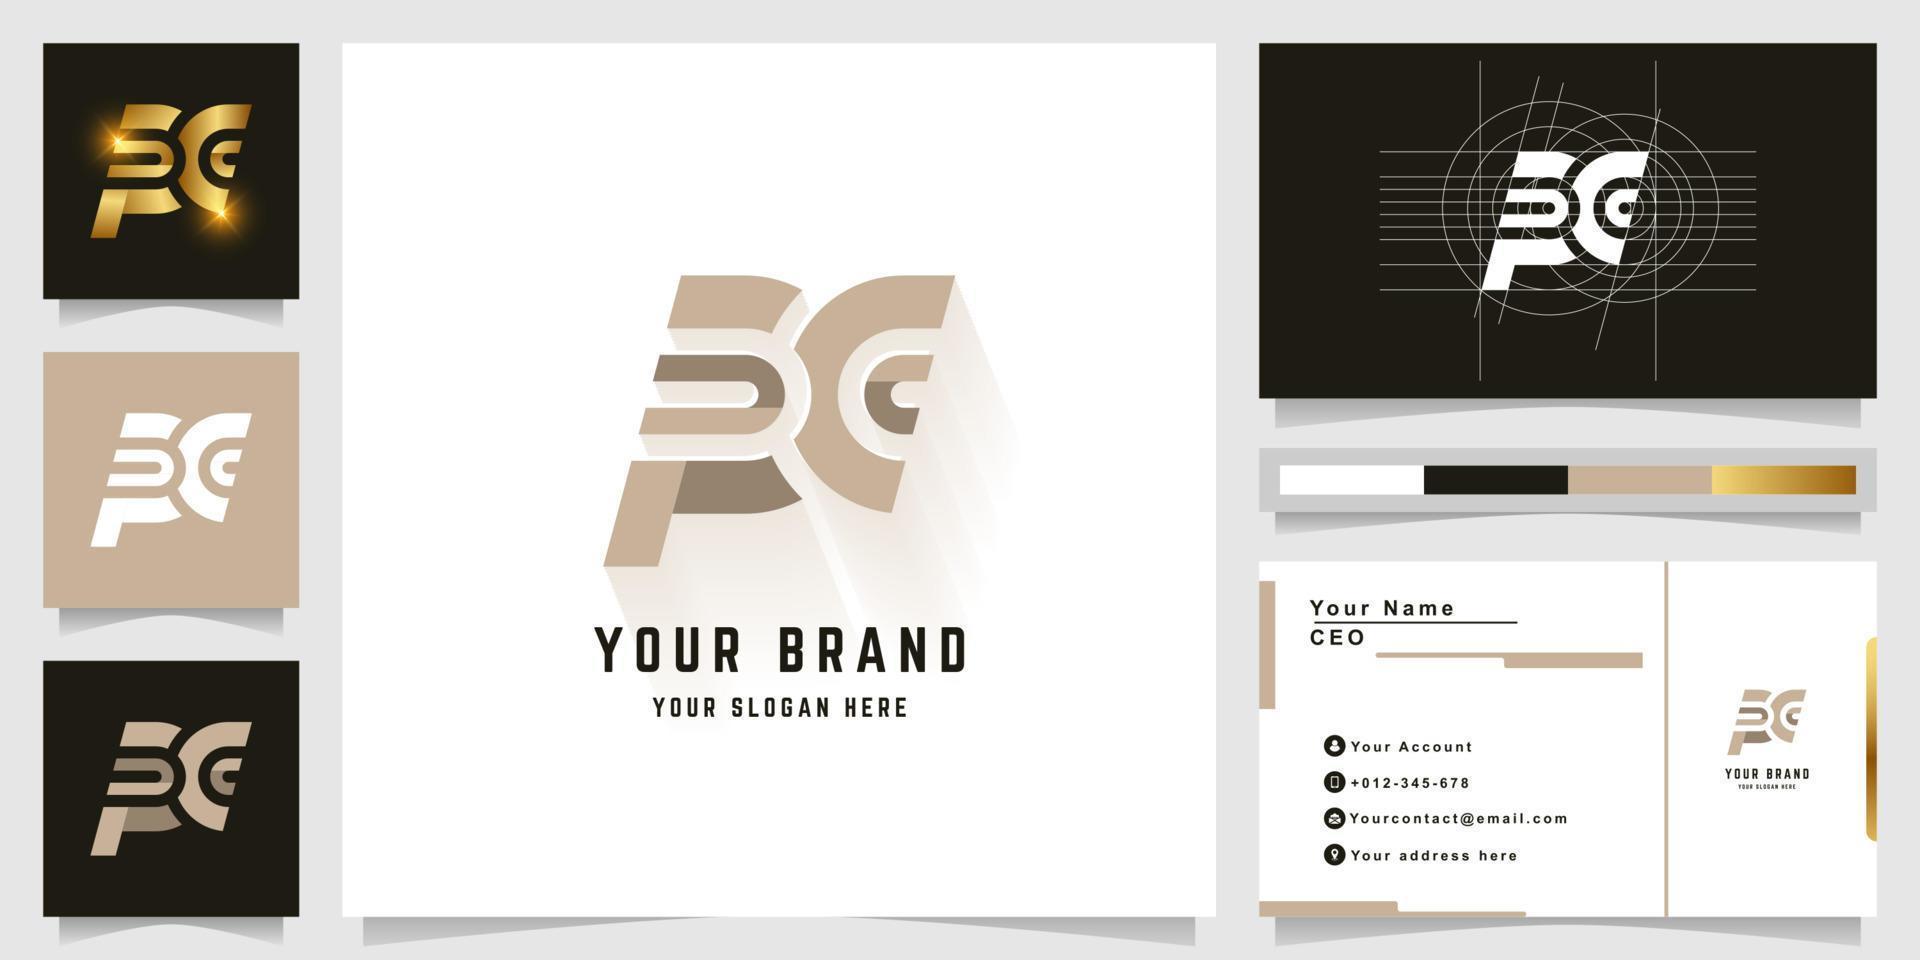 Letter PC or FC monogram logo with business card design vector